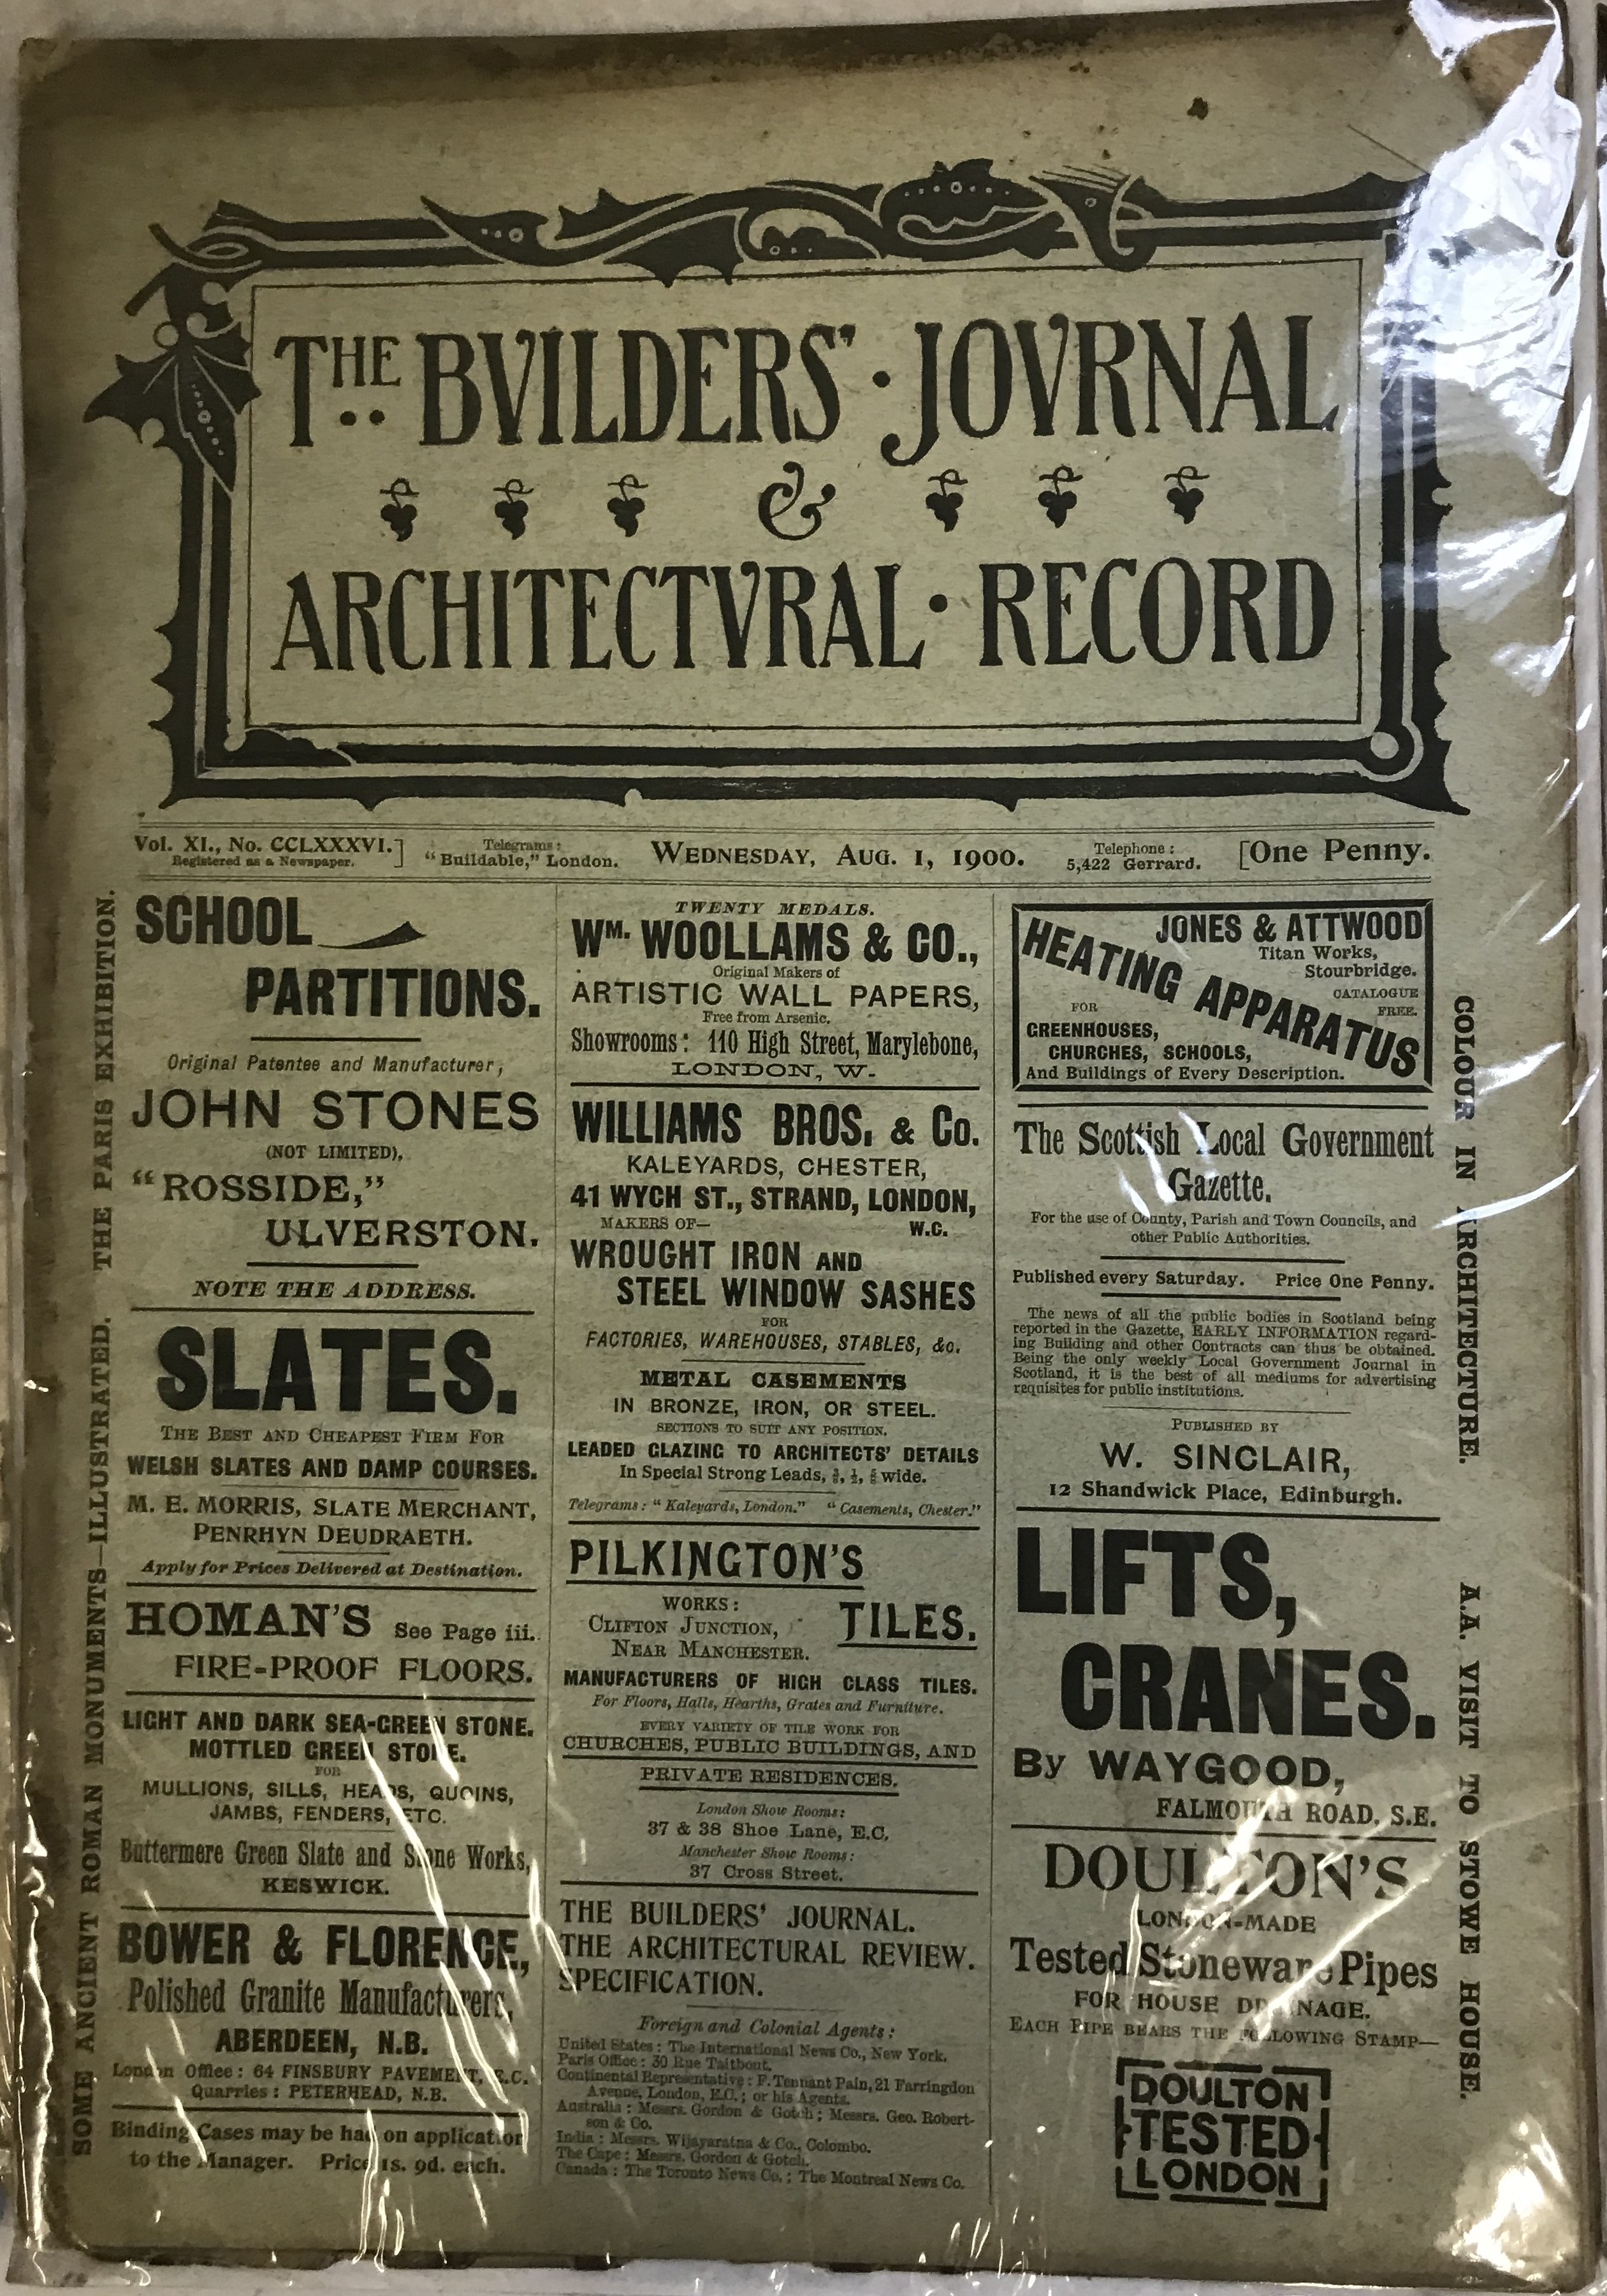 THE BUILDERS JOURNAL 1899 -1902 - Image 14 of 18